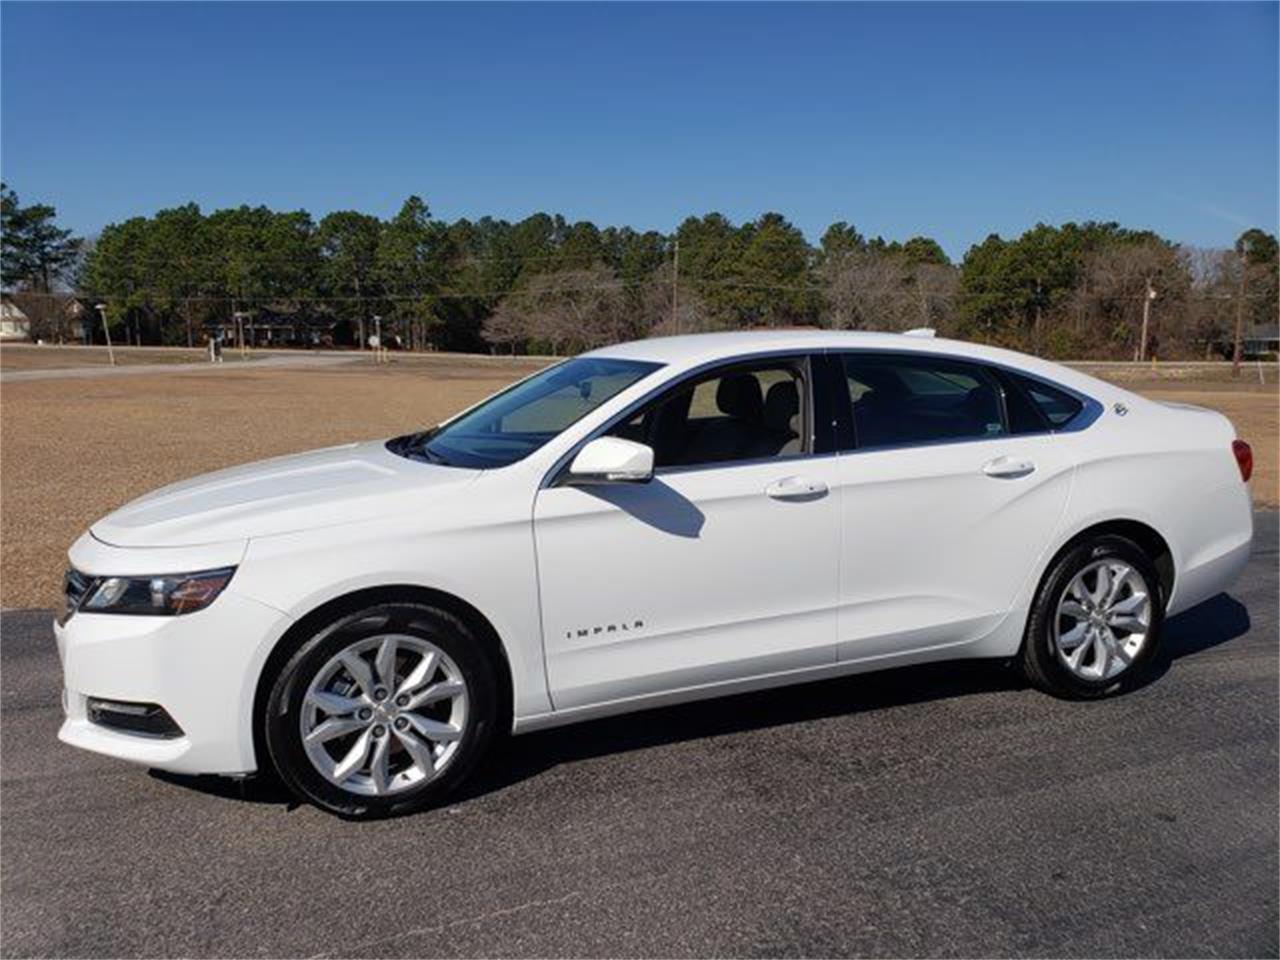 2018 Chevrolet Impala for sale in Hope Mills, NC